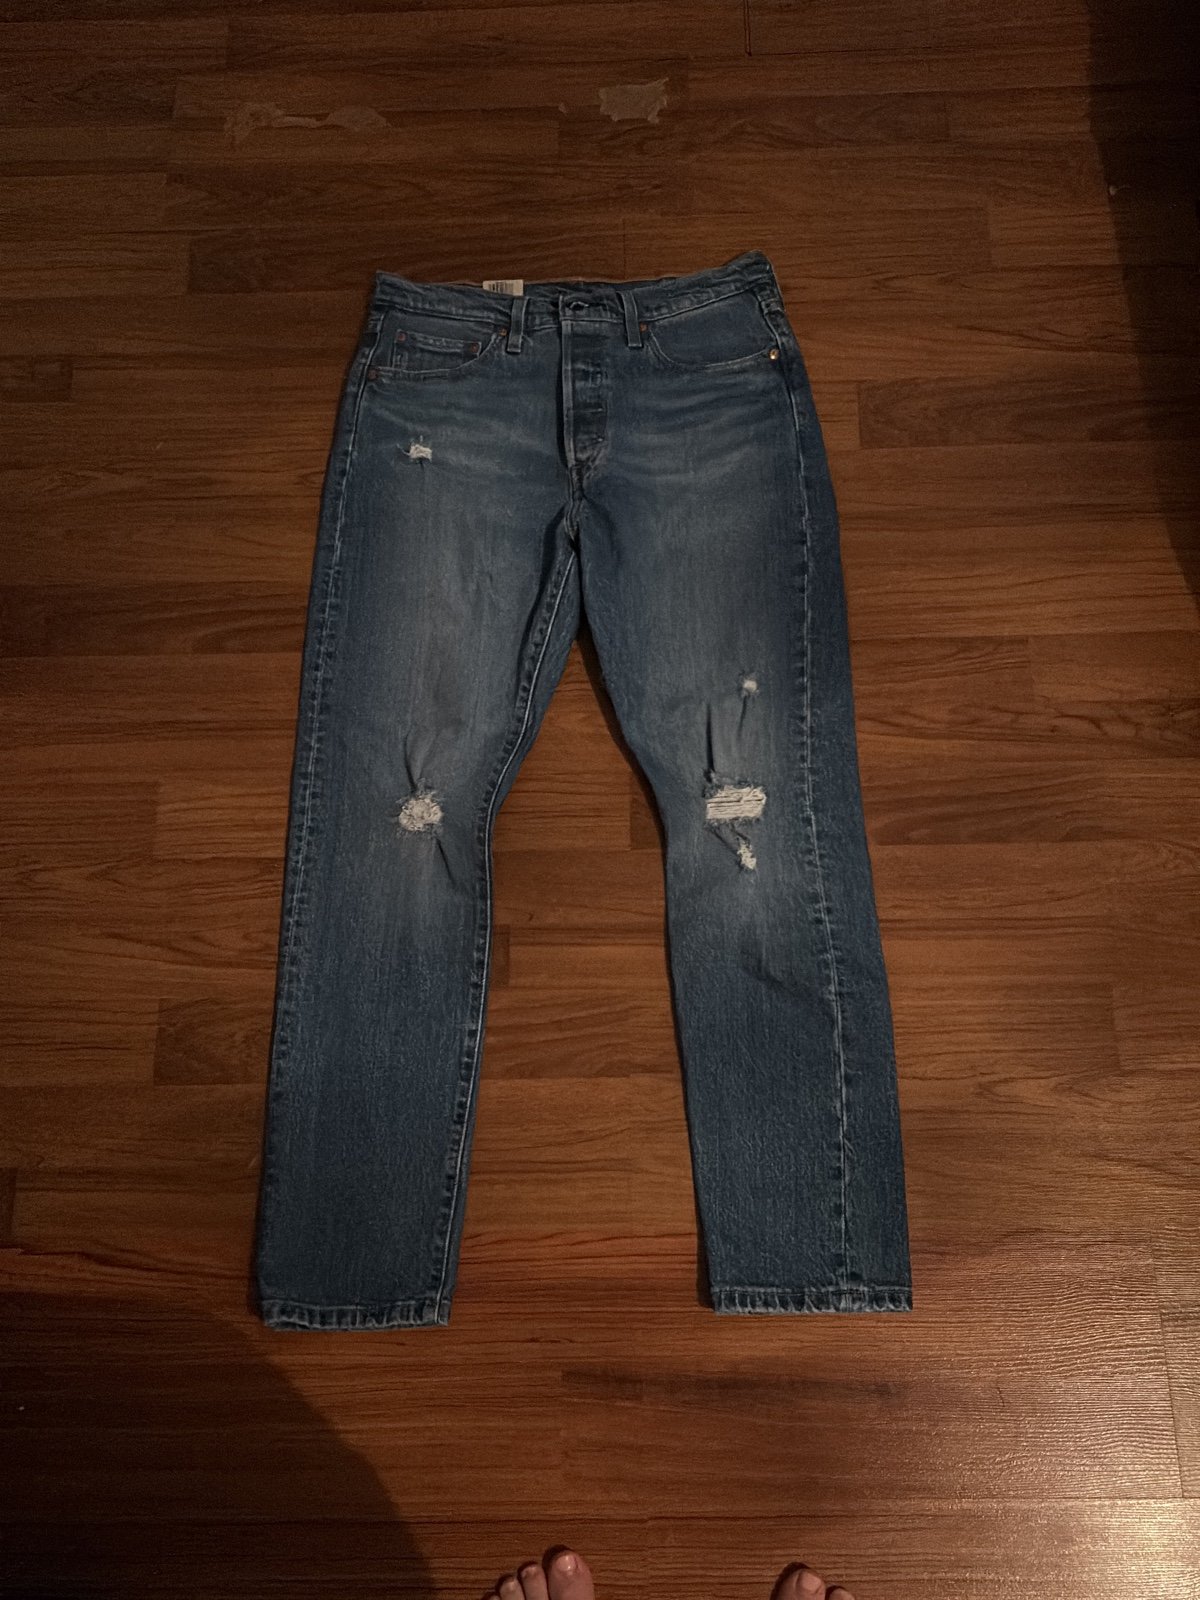 the Lowest price Levi’s jeans I70atPKC5 US Outlet